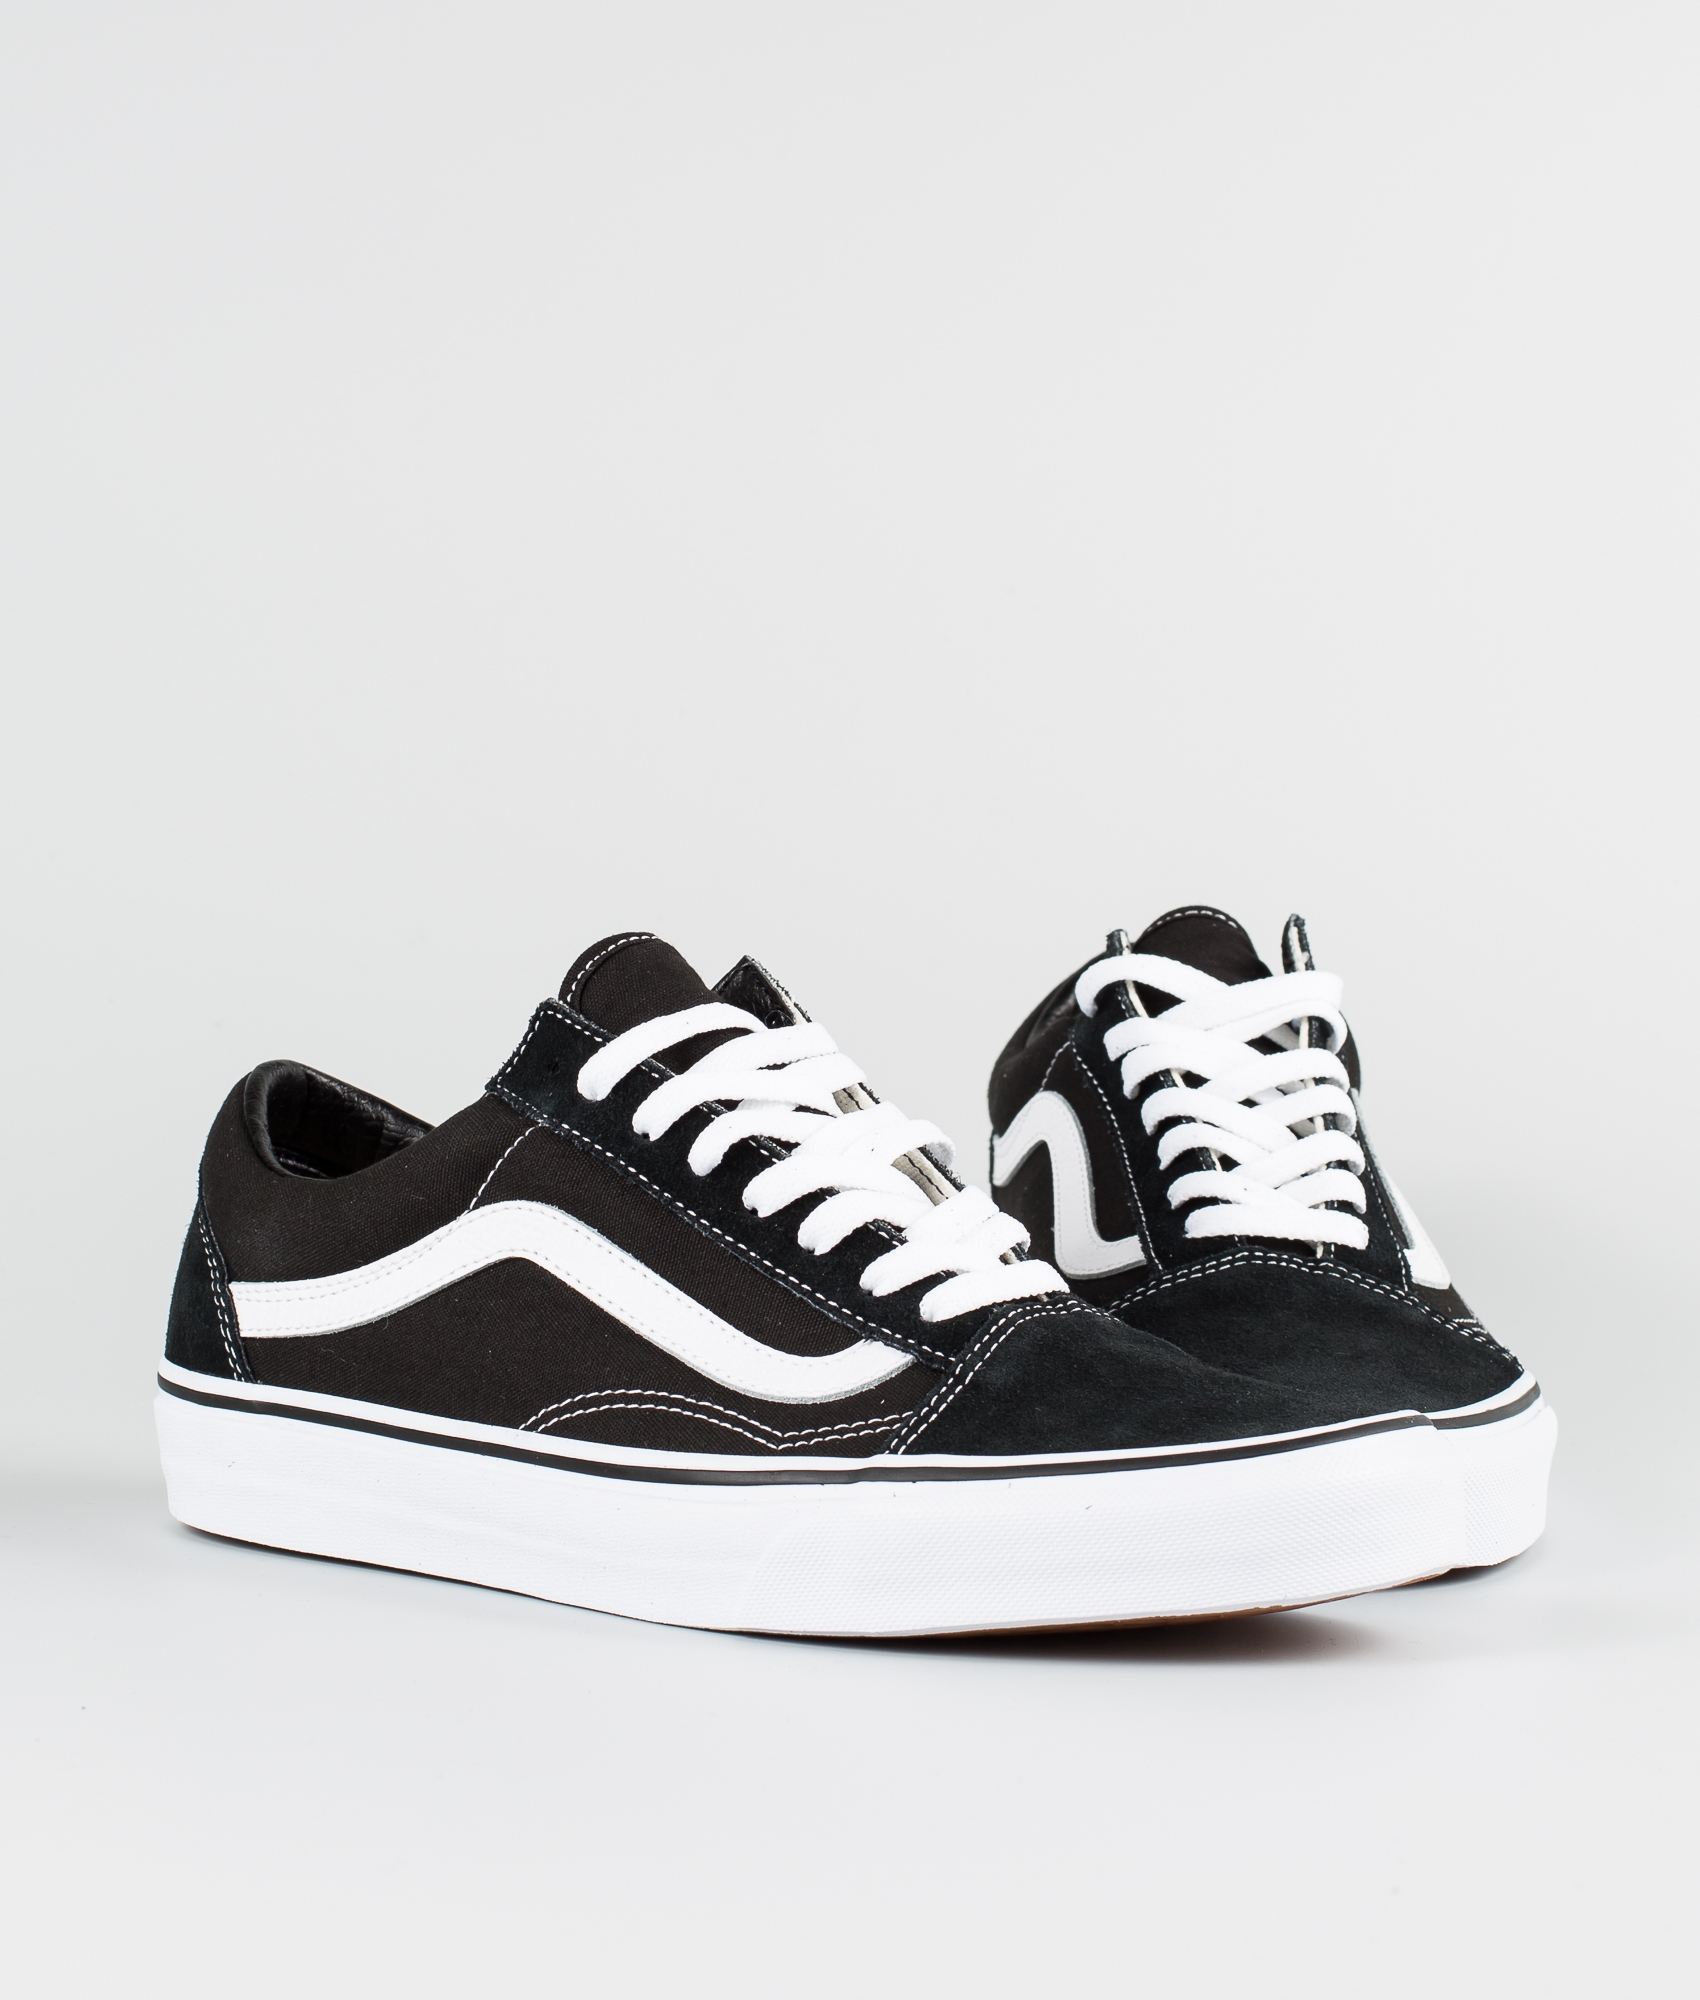 classic white and black vans